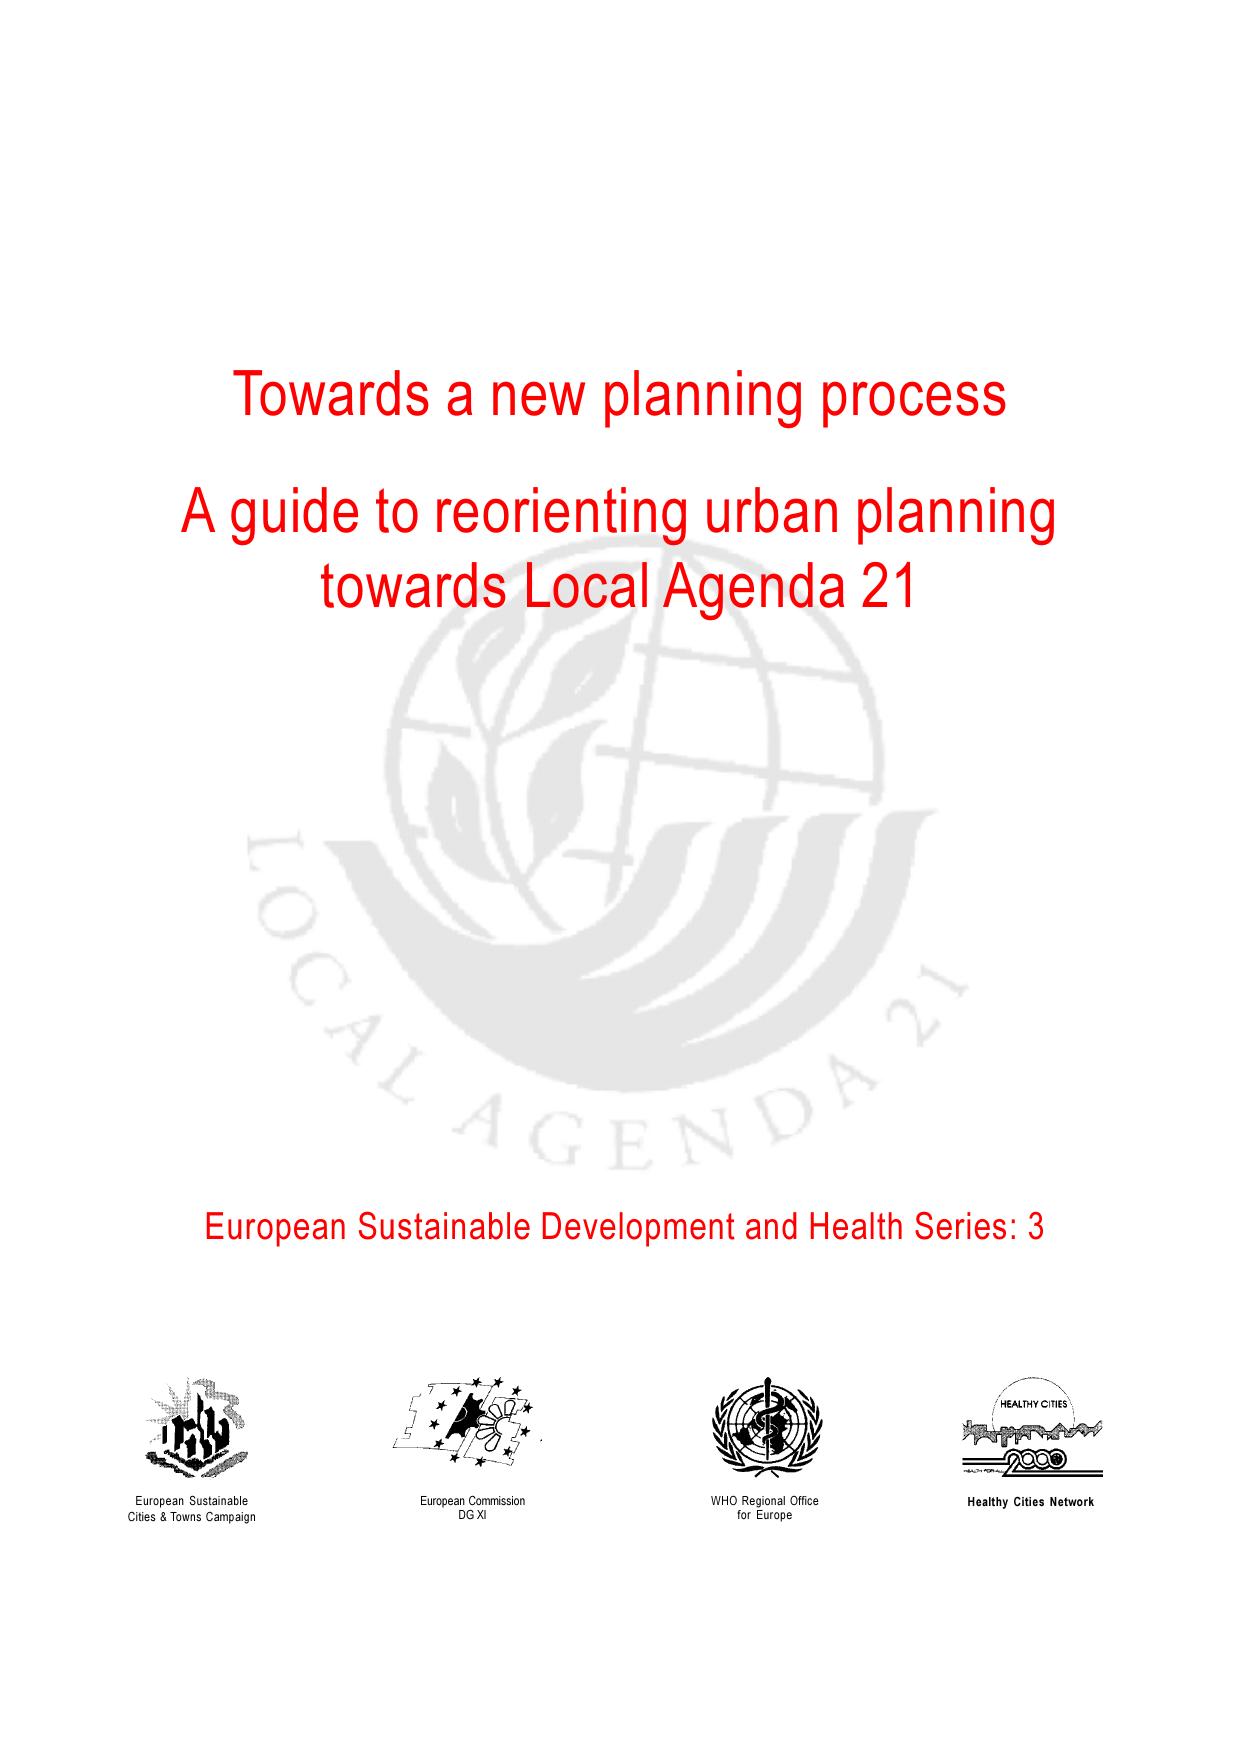 Towards a new planning process: guide to reorienting urban planning towards Local Agenda 21